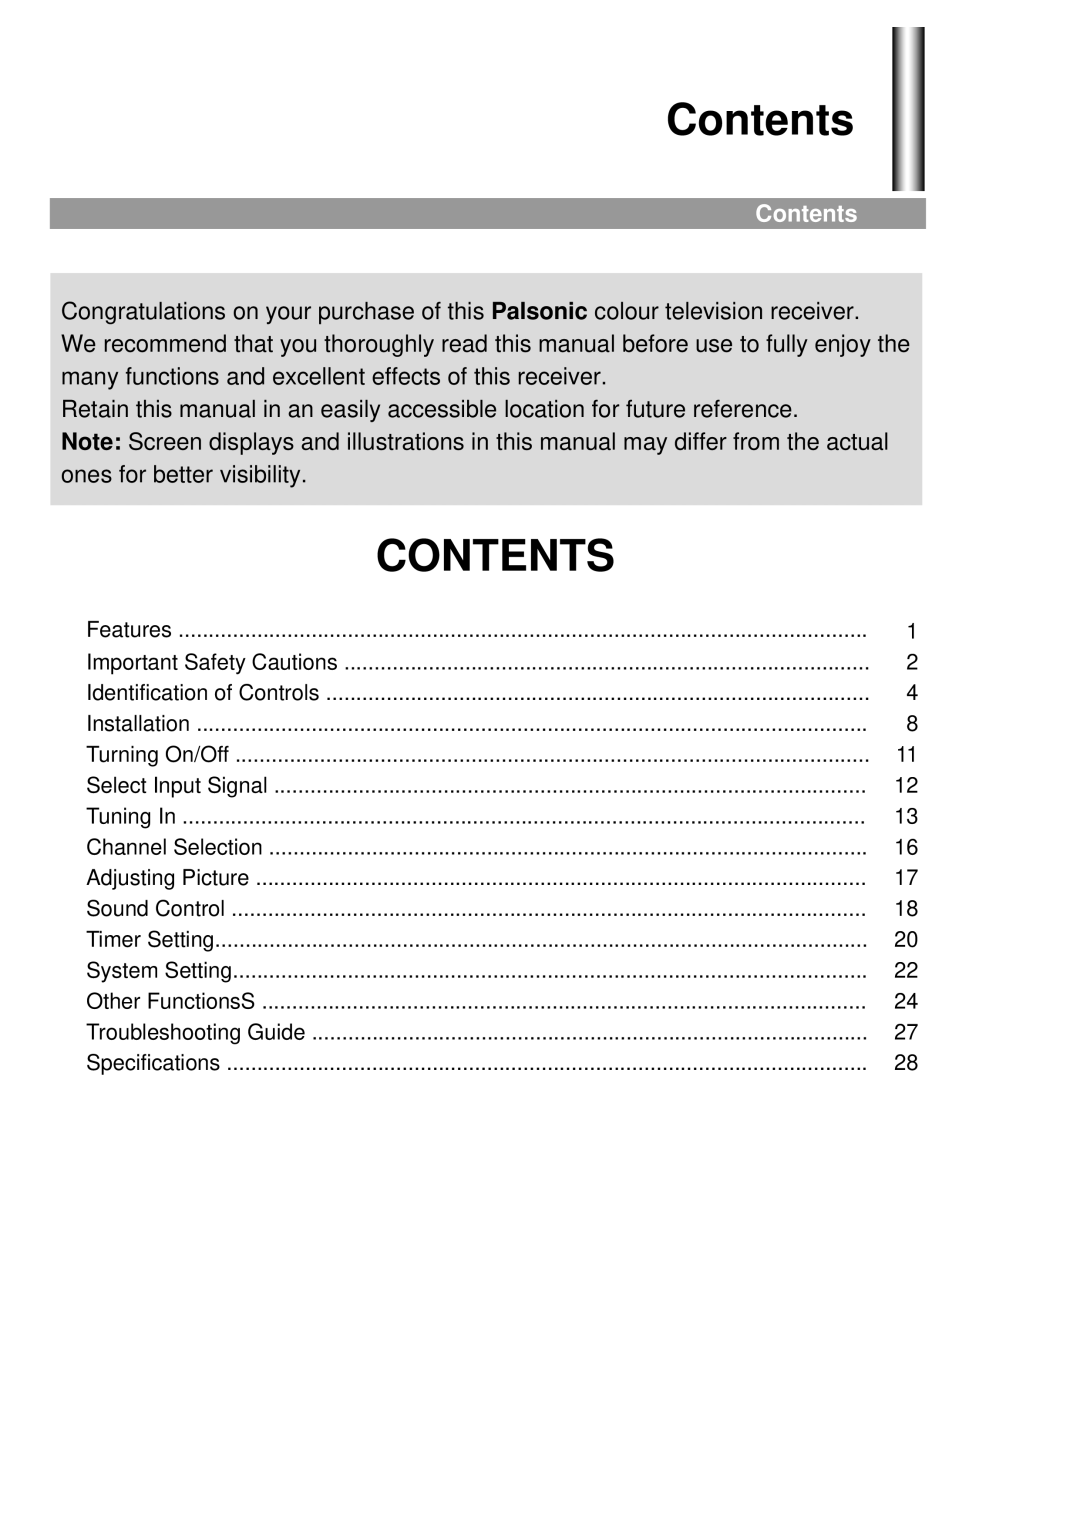 Palsonic 6825G owner manual Contents 